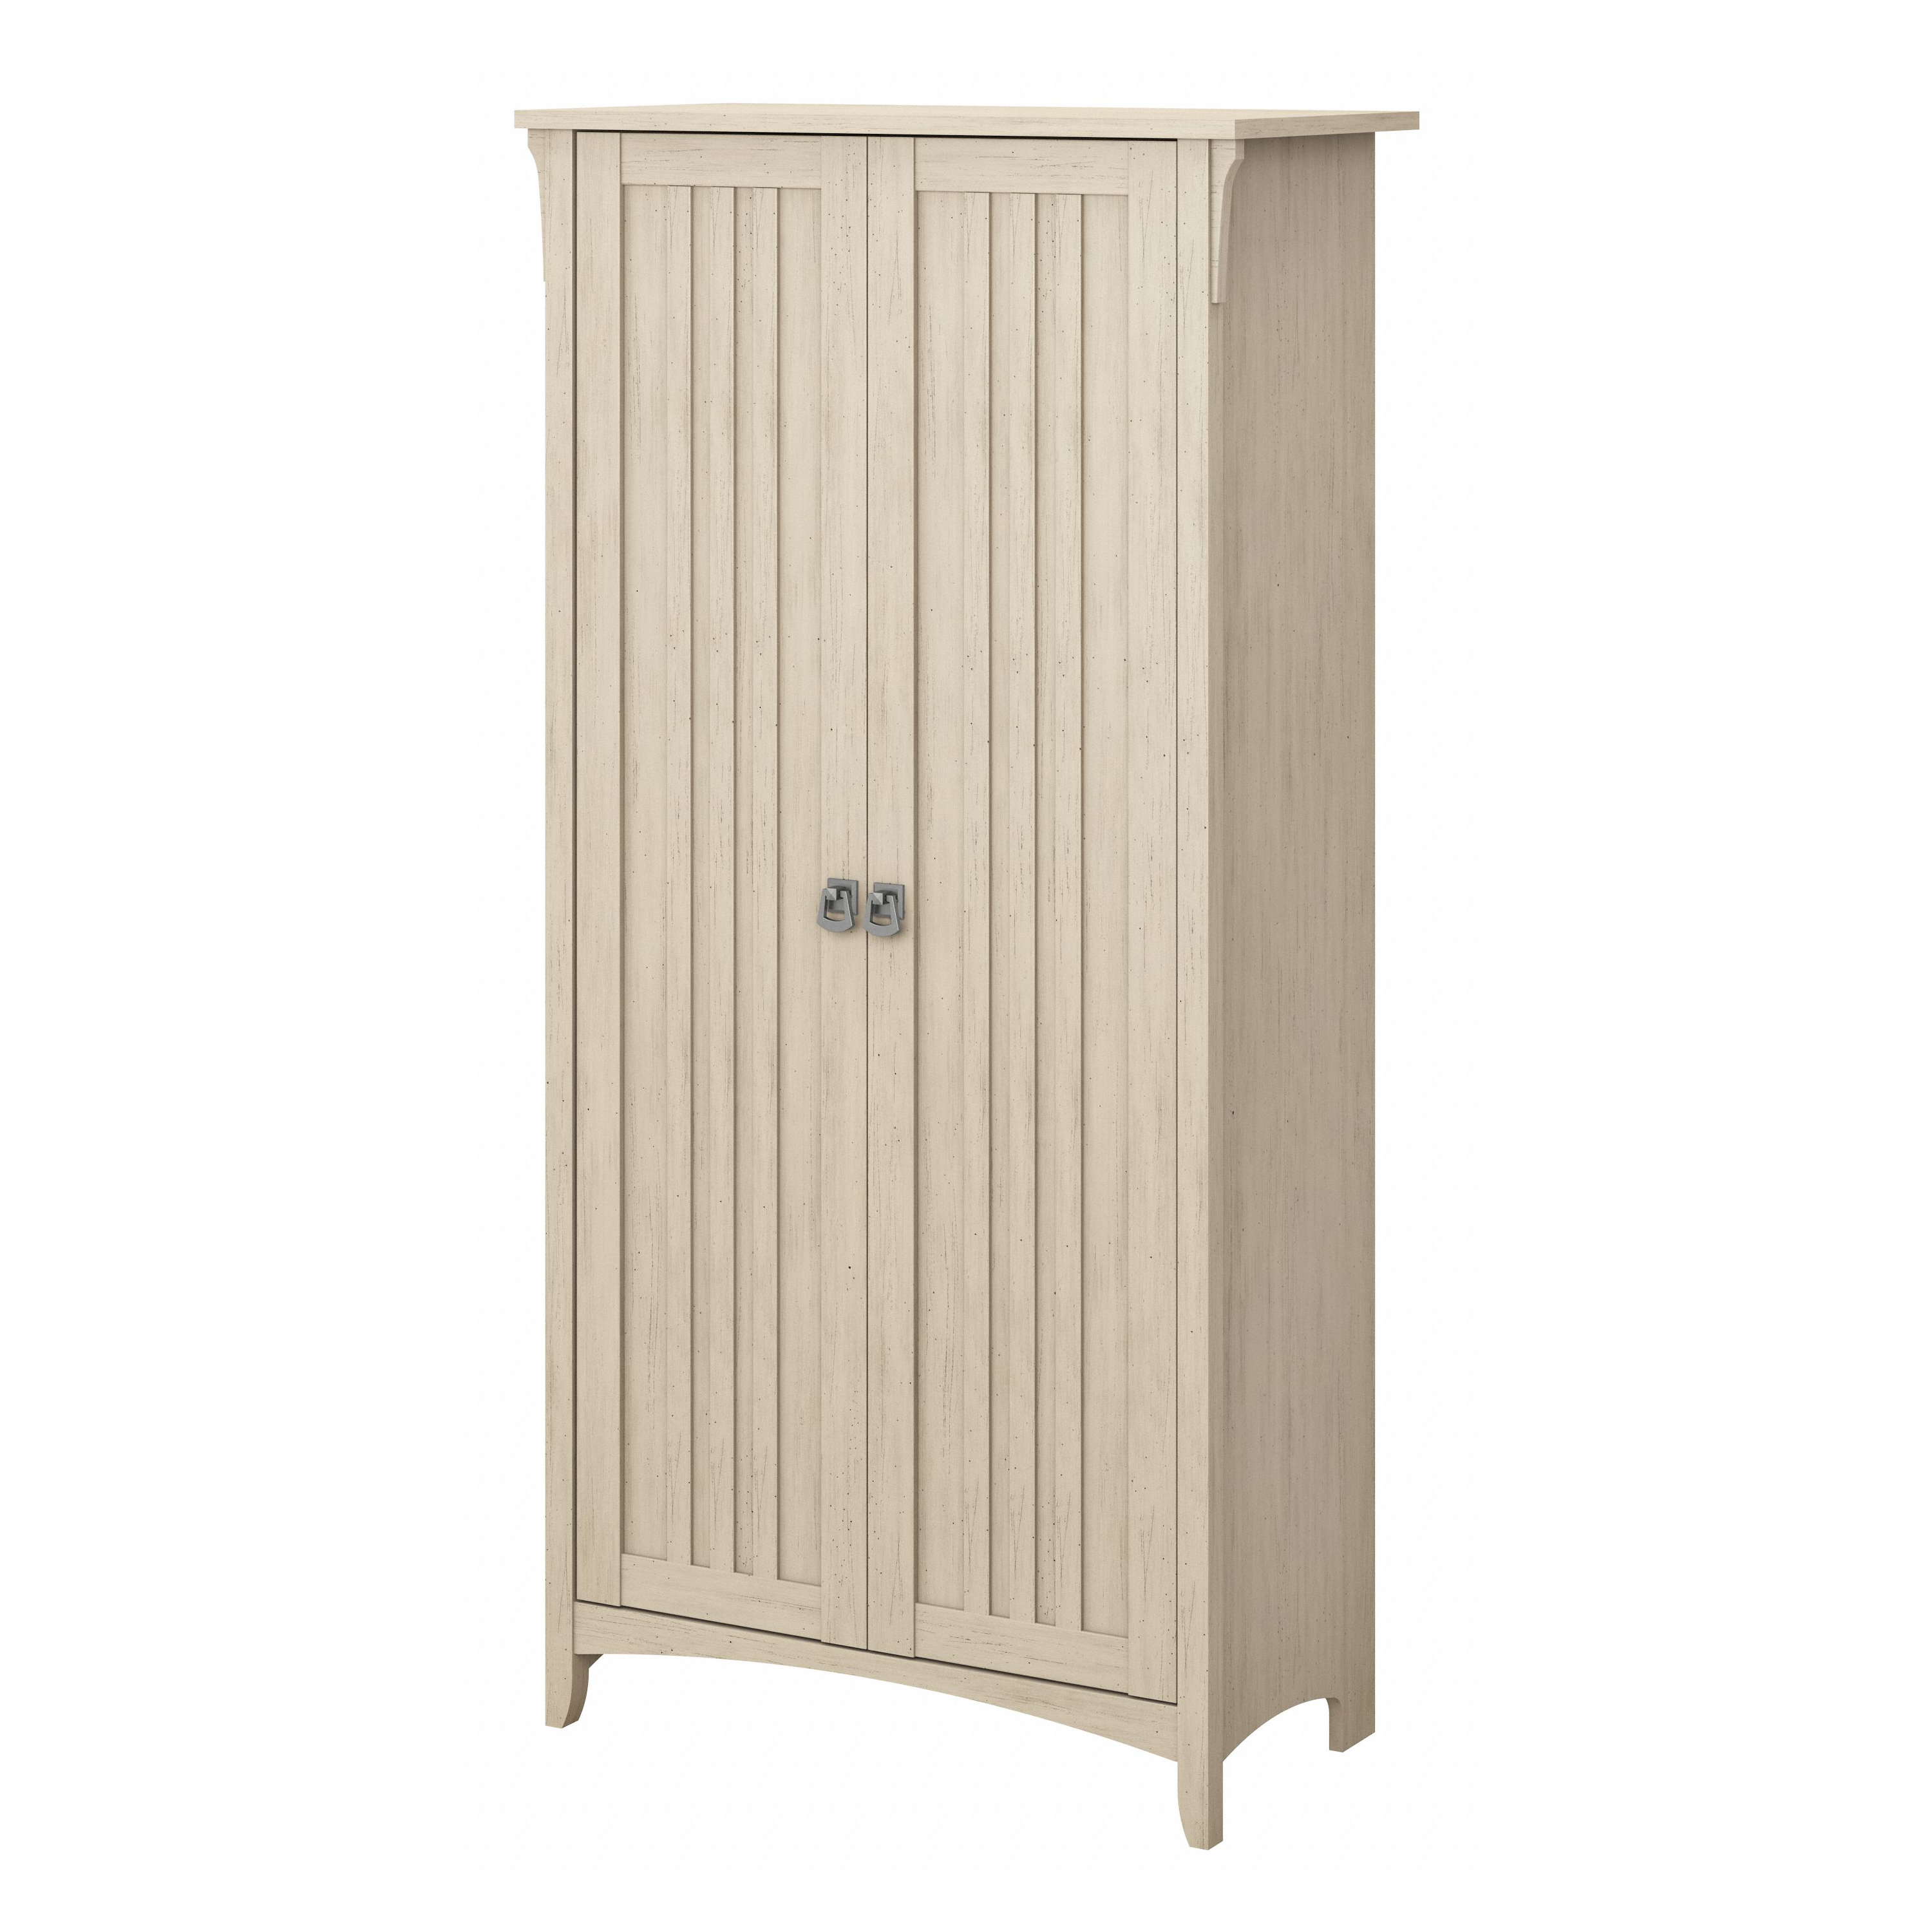 Shop Bush Furniture Salinas Tall Storage Cabinet with Doors 02 SAS332AW-03 #color_antique white